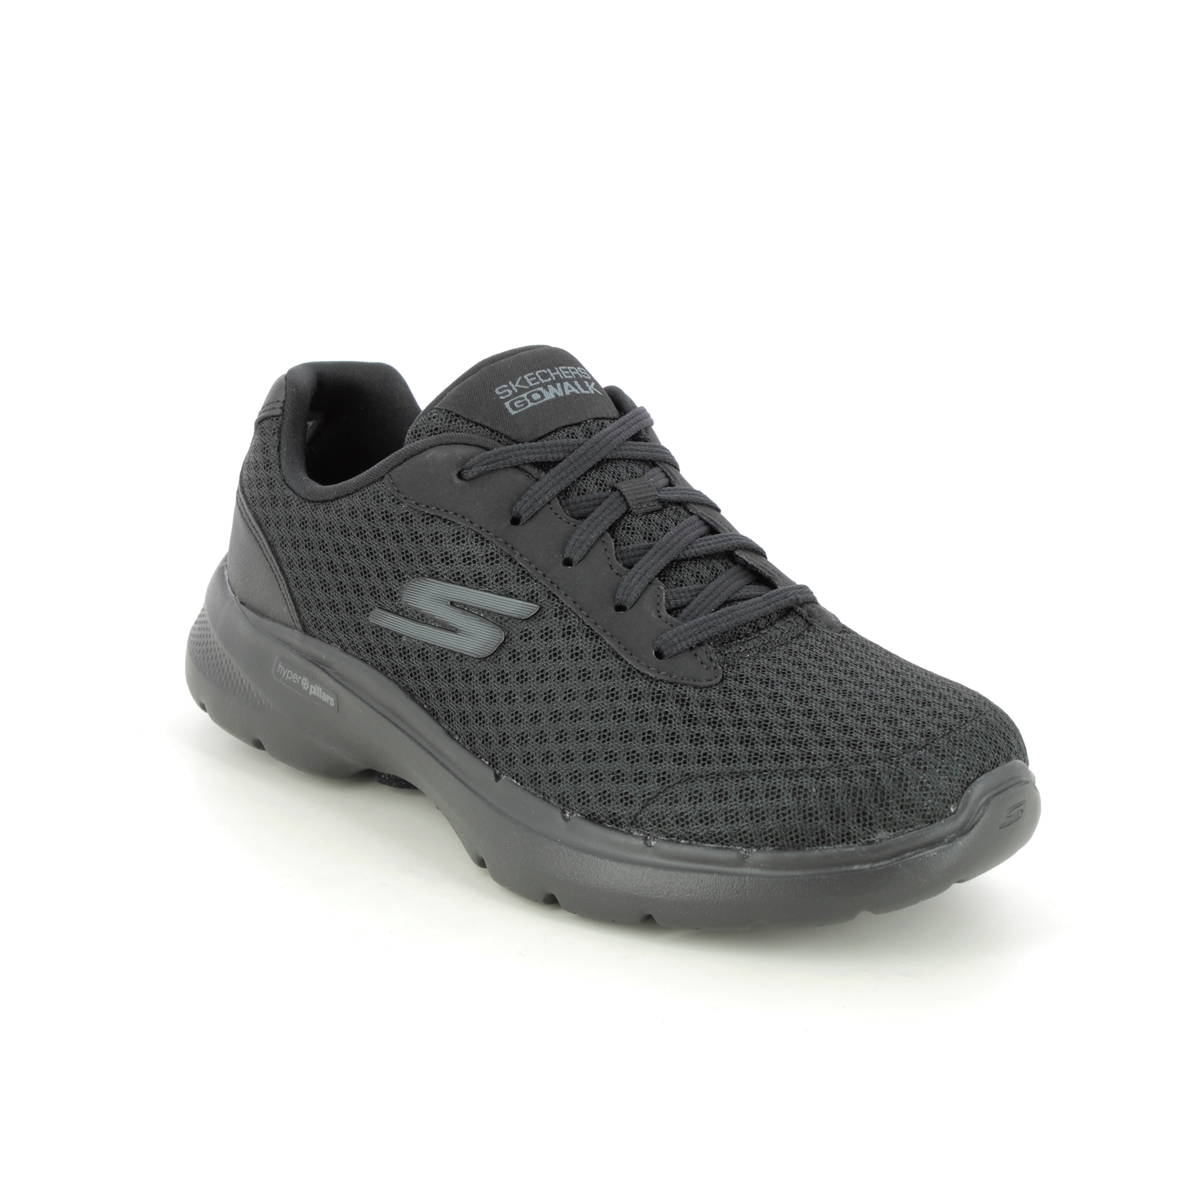 Skechers Go Walk 6 Lace BBK Black Womens trainers 124514 in a Plain Man-made in Size 4